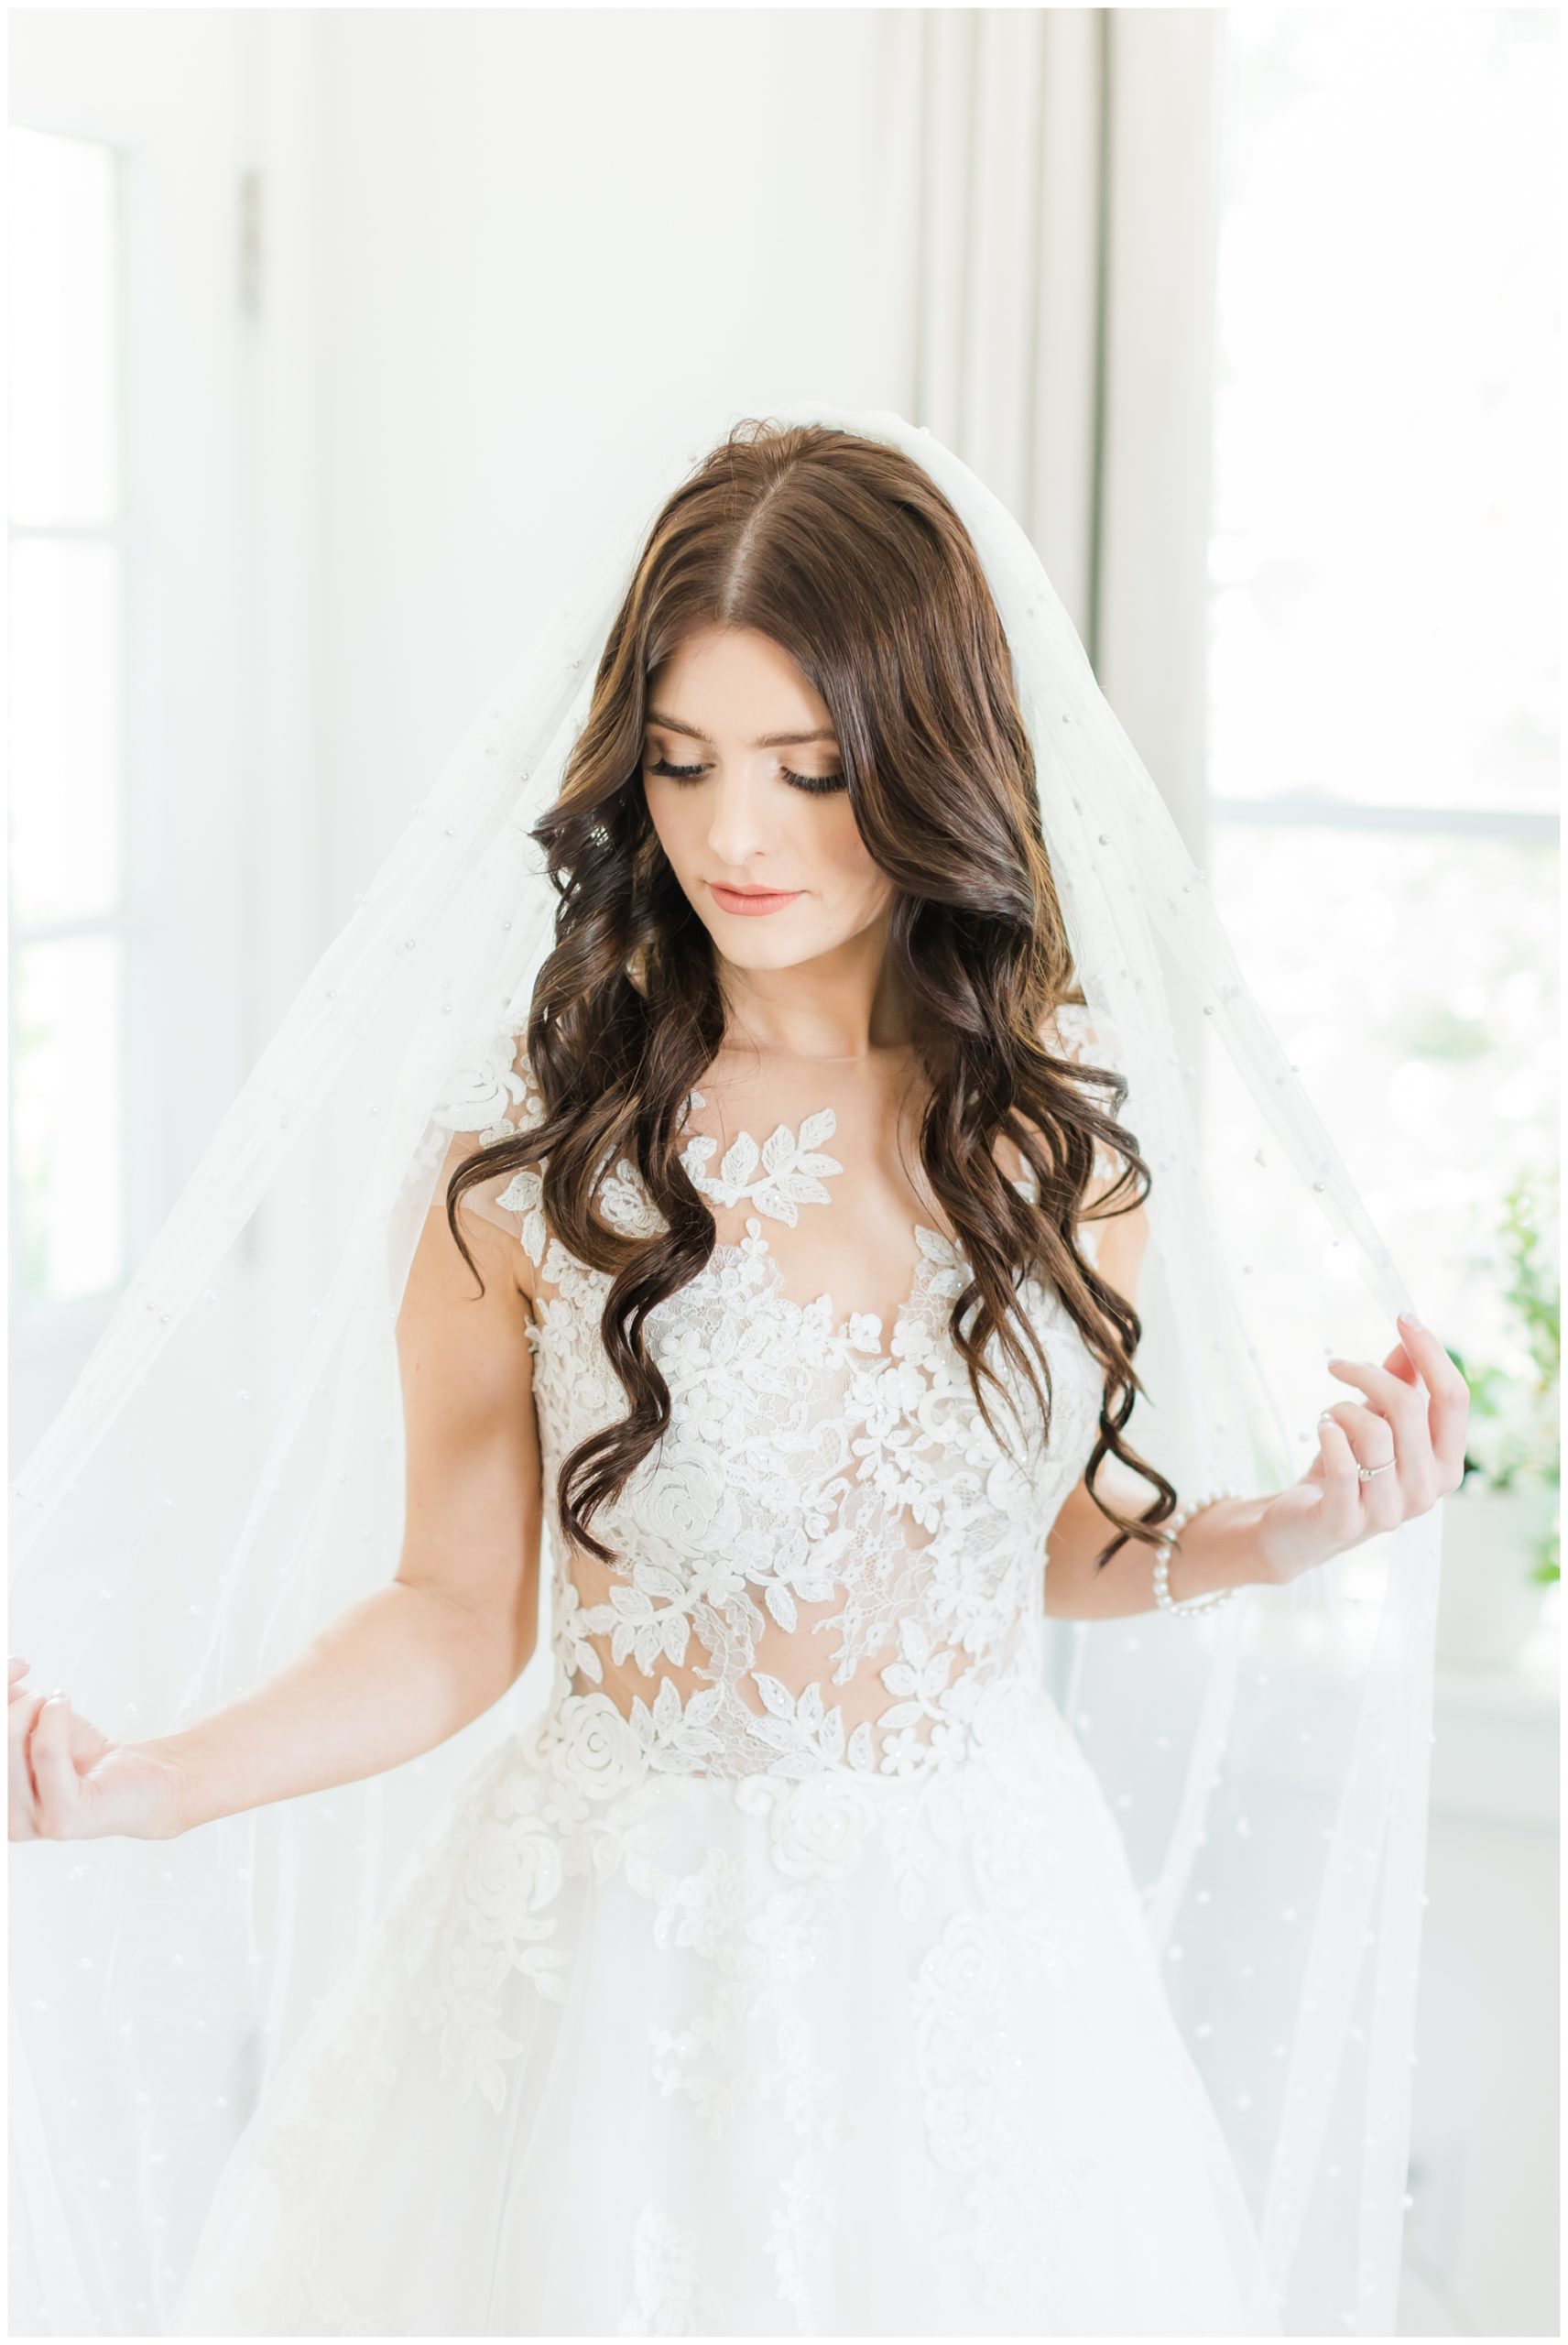 The bride poses in her white lace wedding dress. 